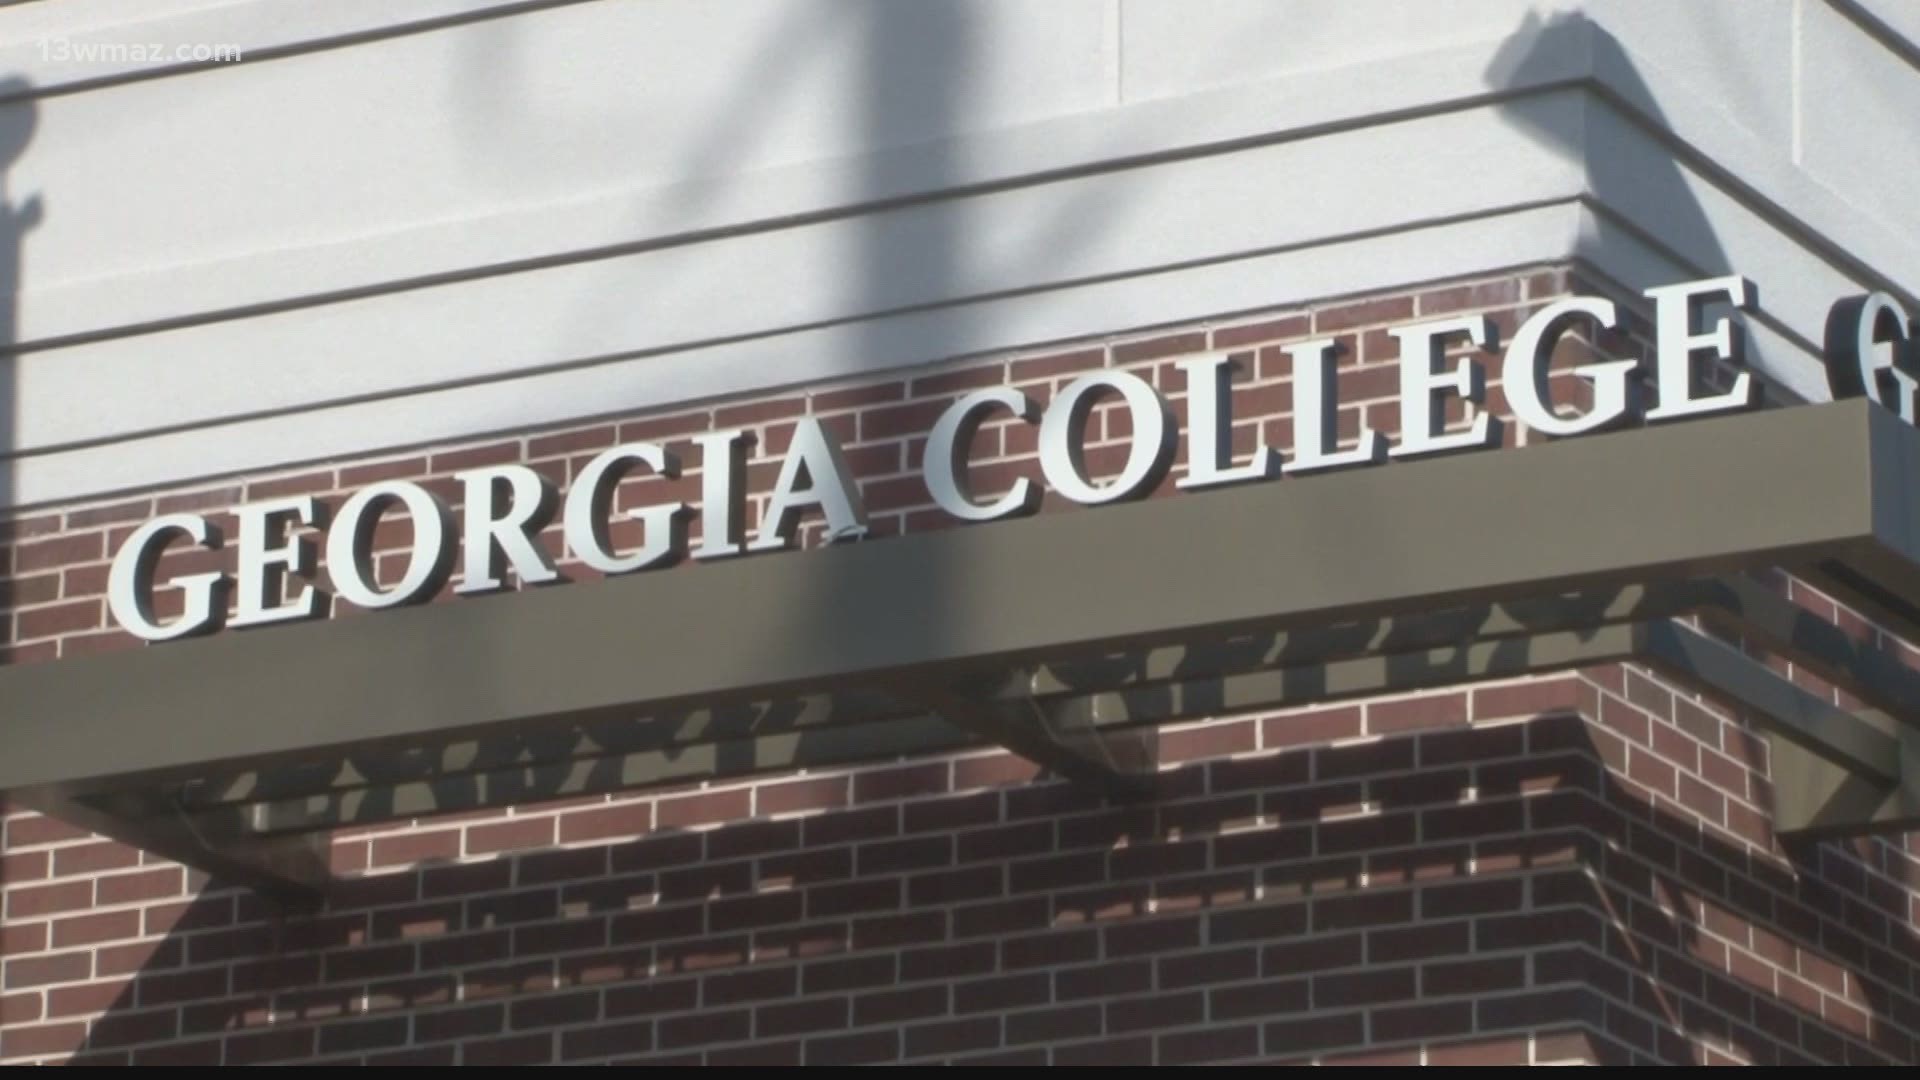 Georgia College students are moving in this weekend before classes start back on Wednesday.